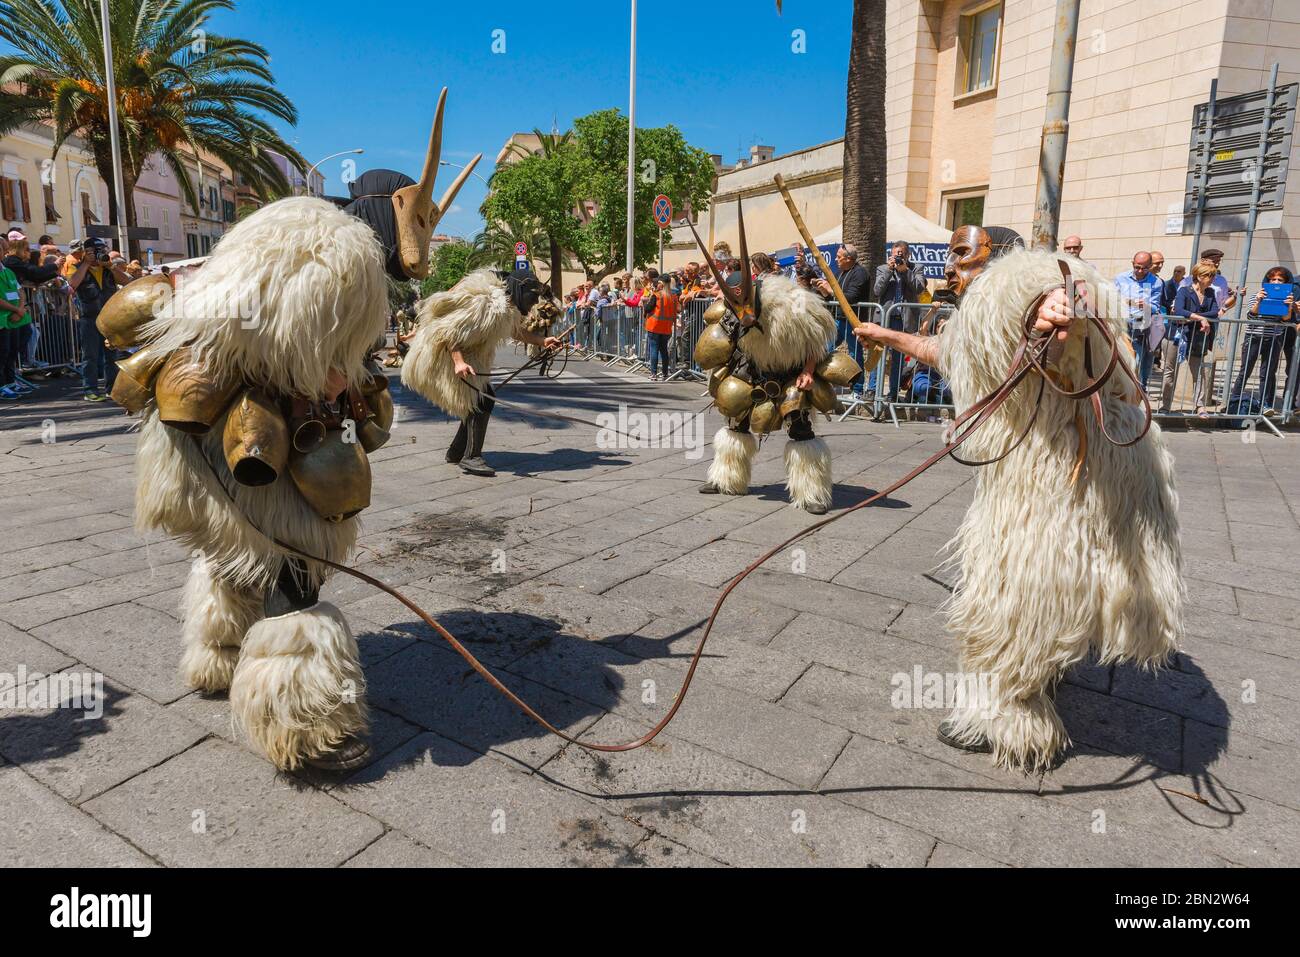 Sardinia festival, men dressed as Boes and Merdules - traditional  figures in sheepskins and masks, participate in the Cavalcata festival, Sassari Stock Photo